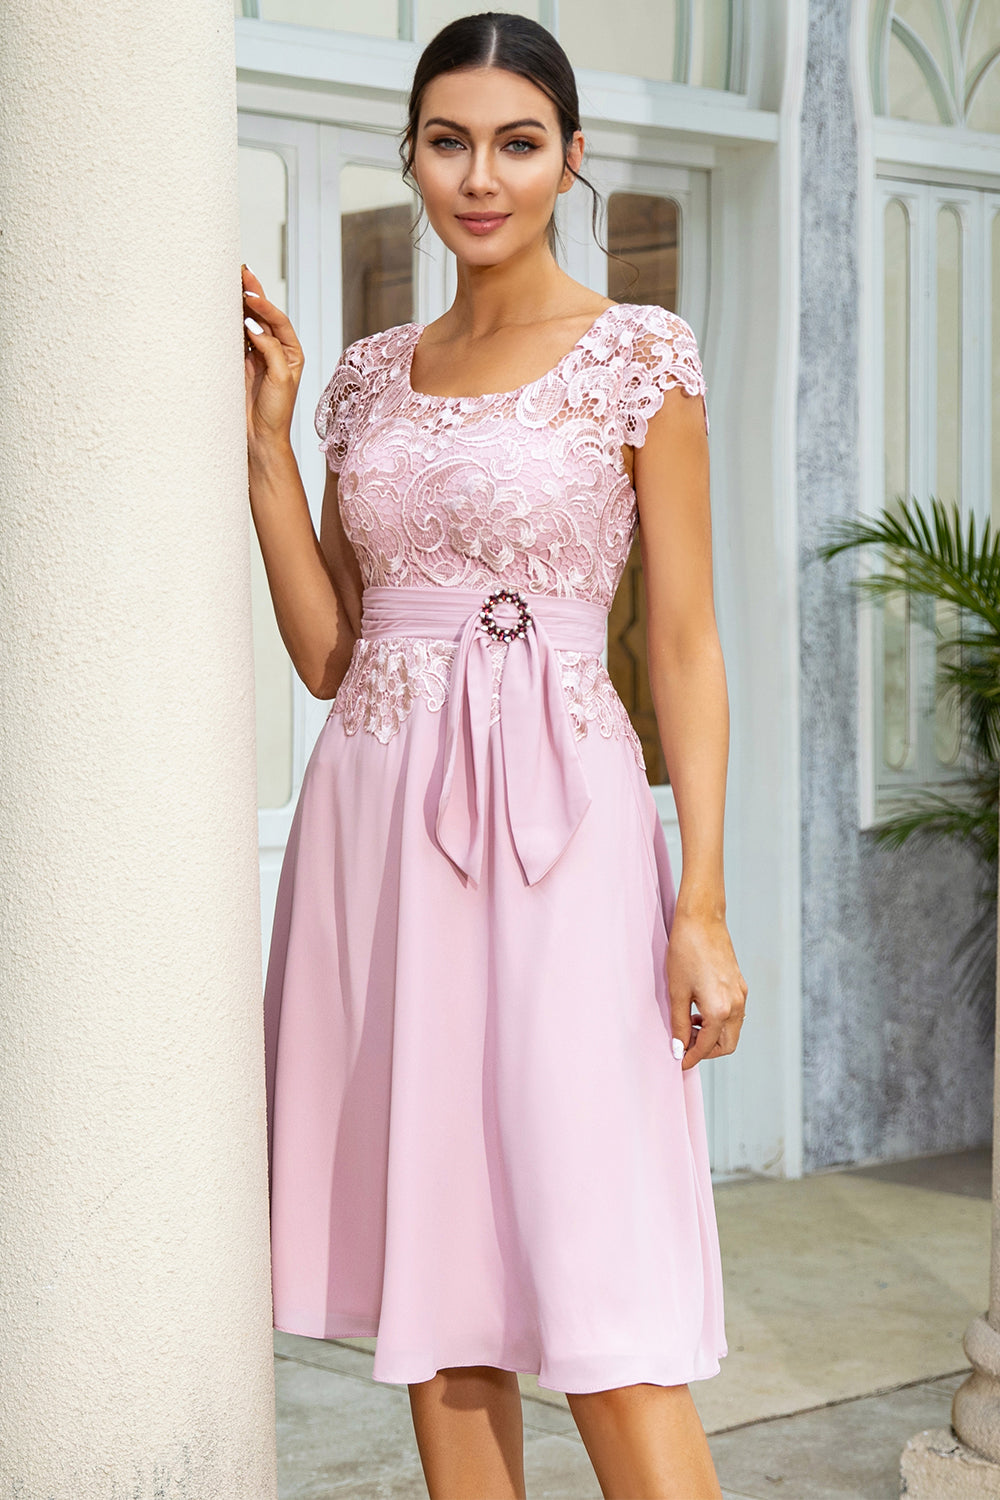 Pink Chiffon Mother of the Bride Dress with Lace